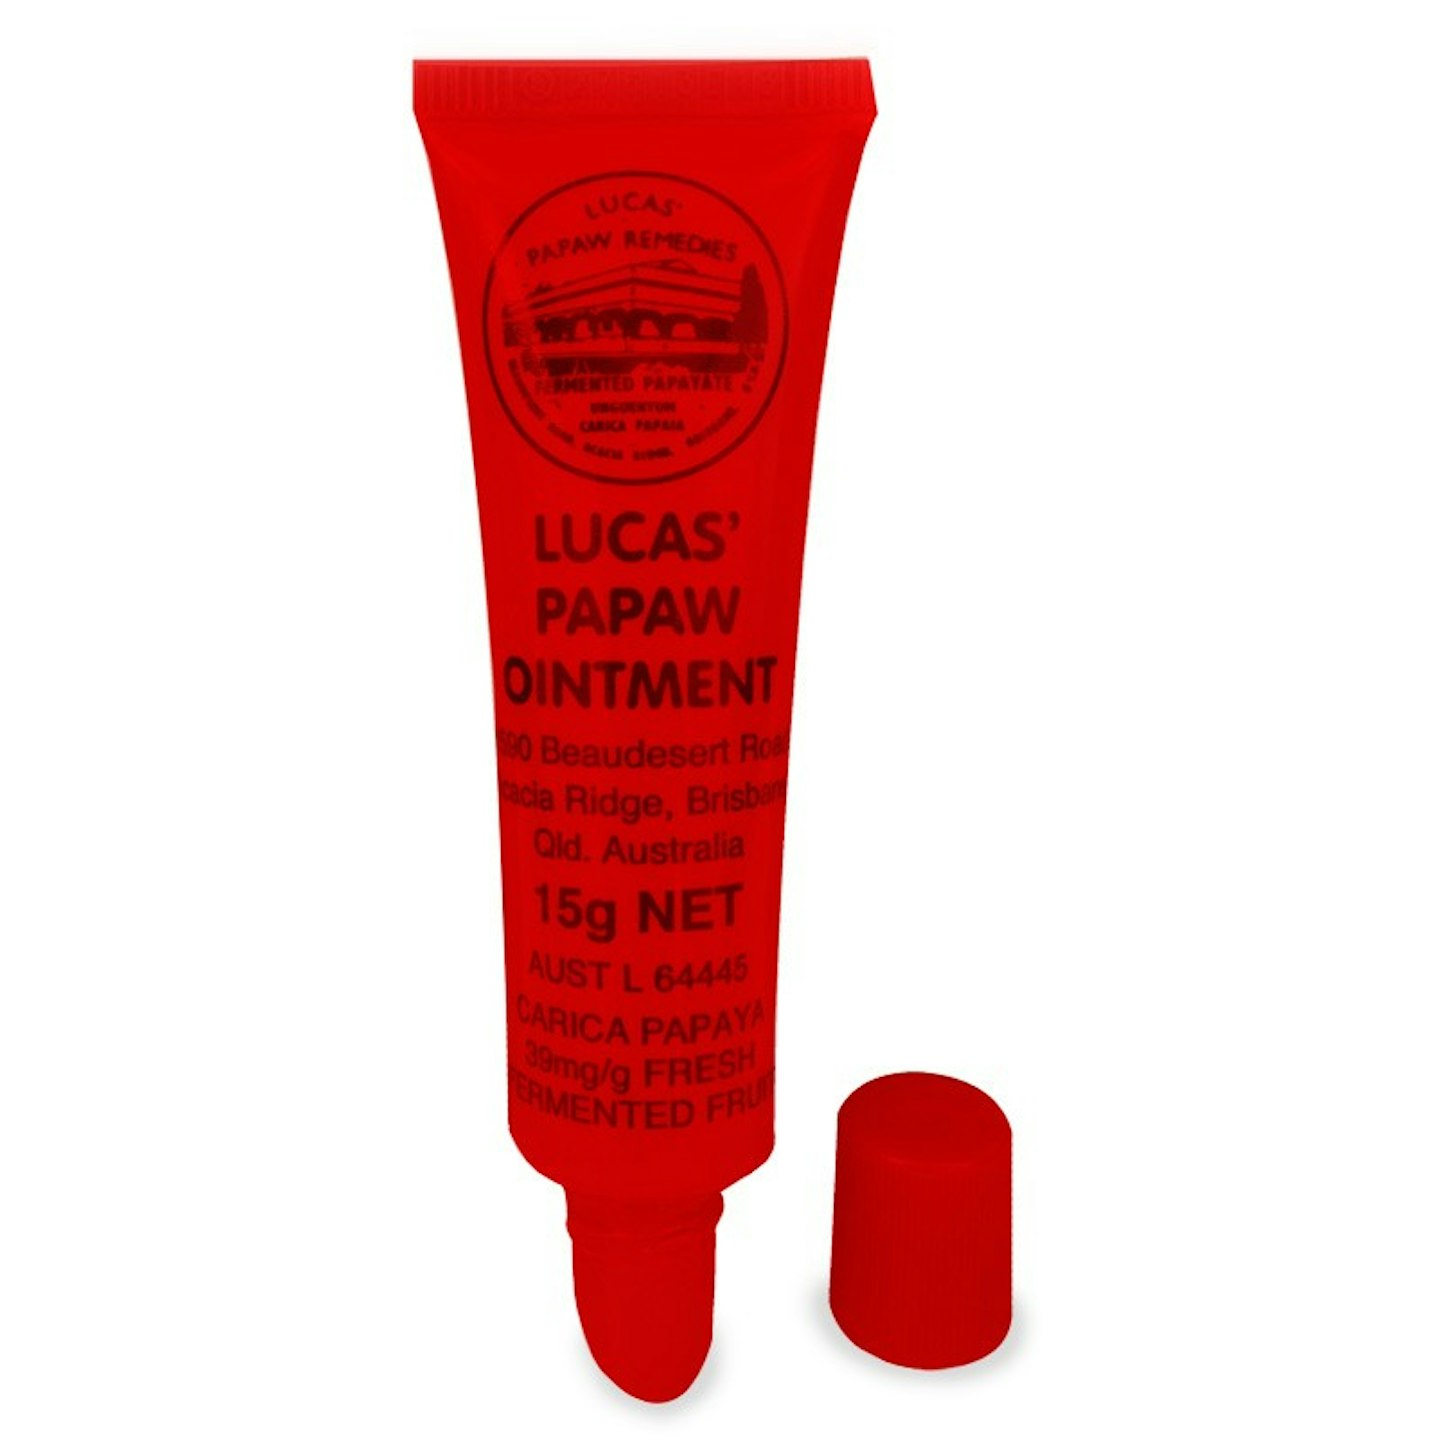 Lucas Papaw Ointment, £6.25